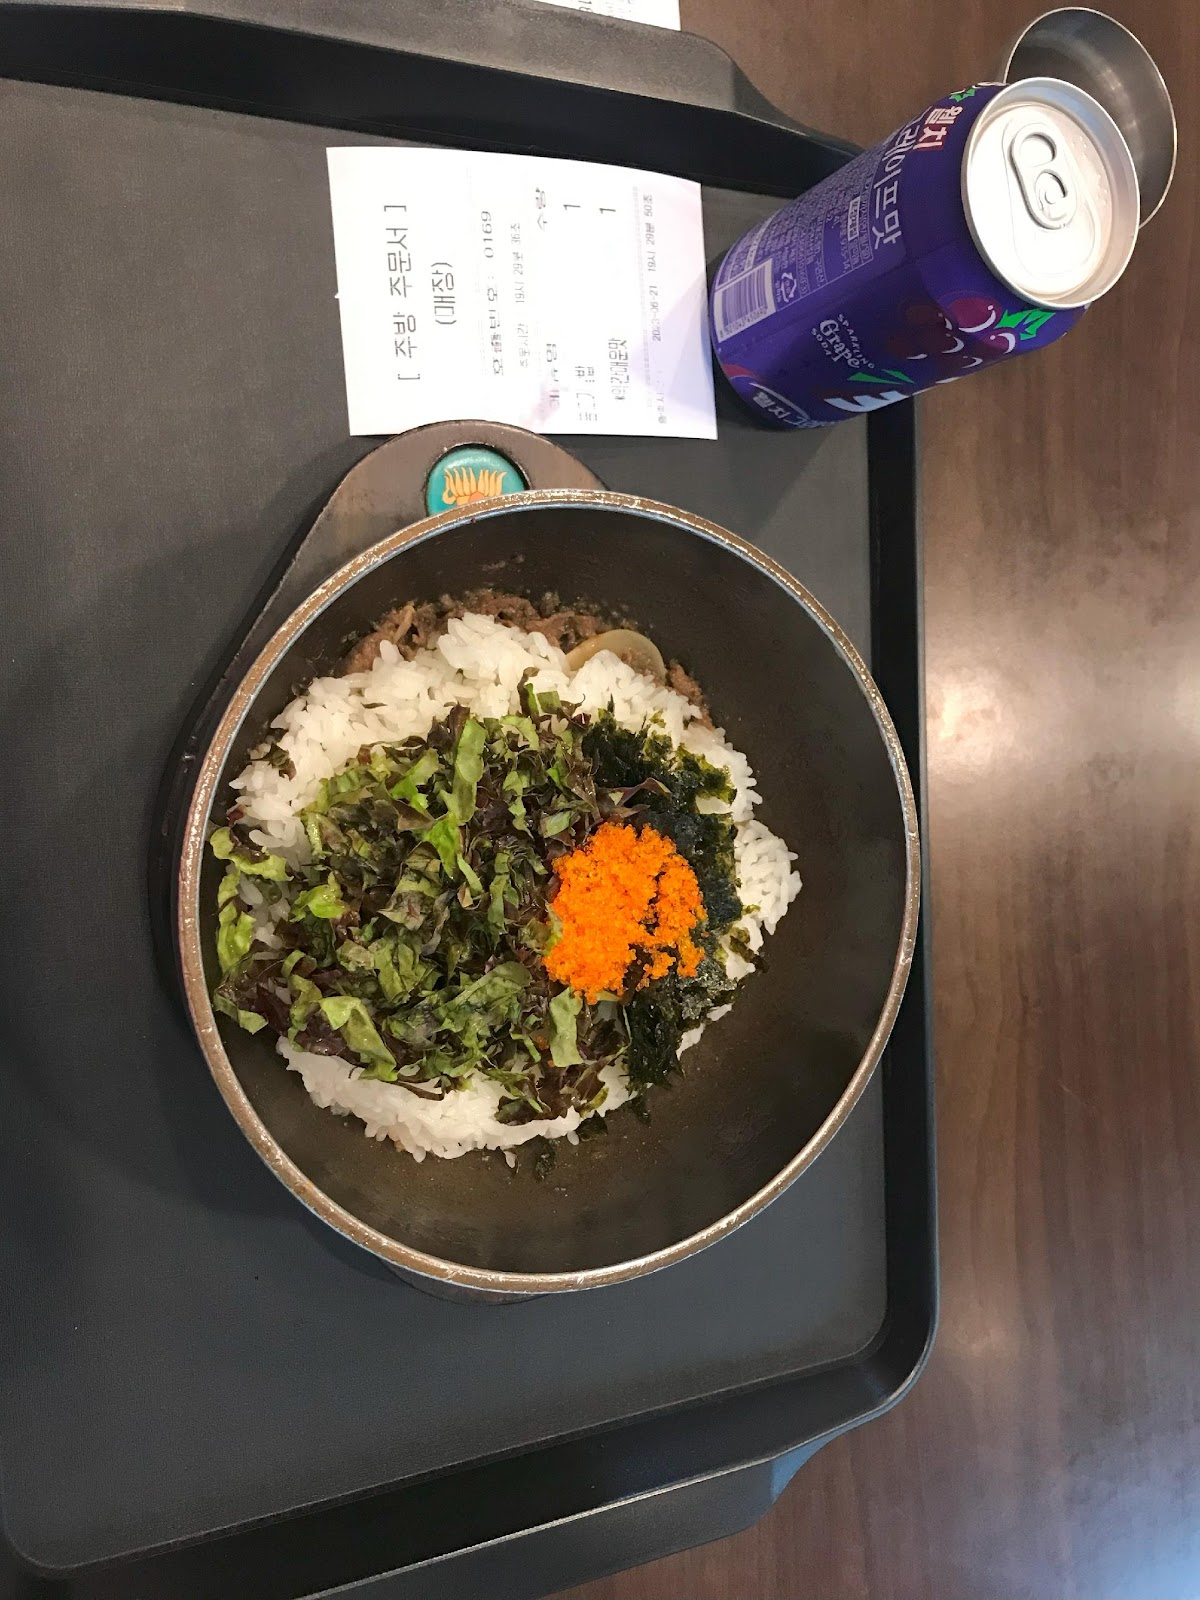 A bowl of rice and vegetables on a tray

Description automatically generated with low confidence